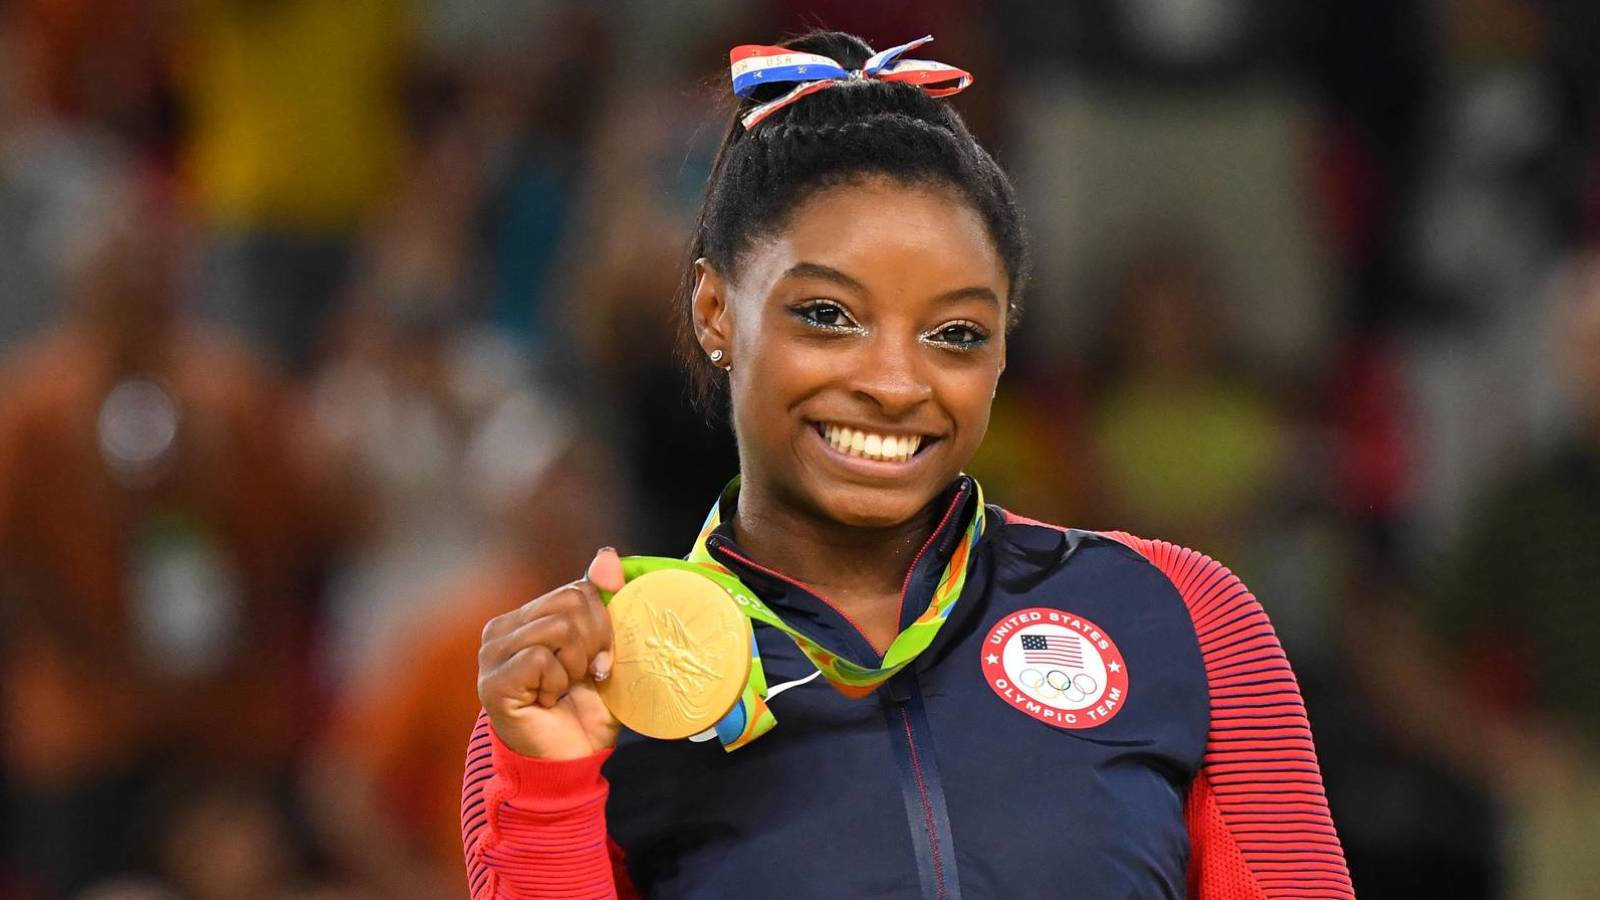 Simone Biles Holding A Gold Medal And Smiling Background